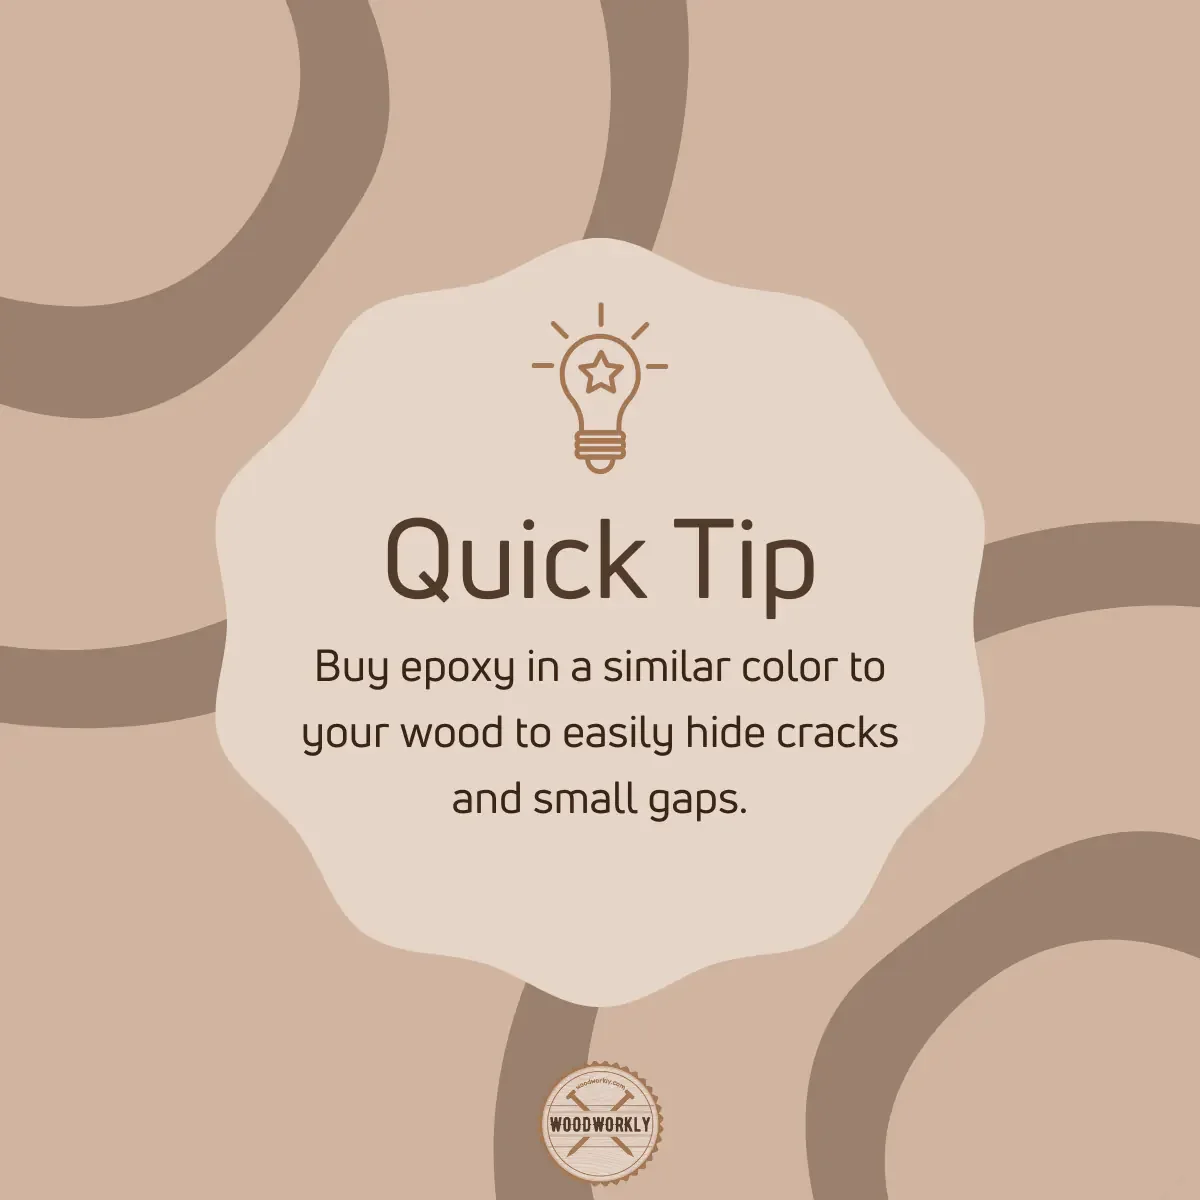 buy epoxy in similar color as wood when fixing wood splits to hide cracks.